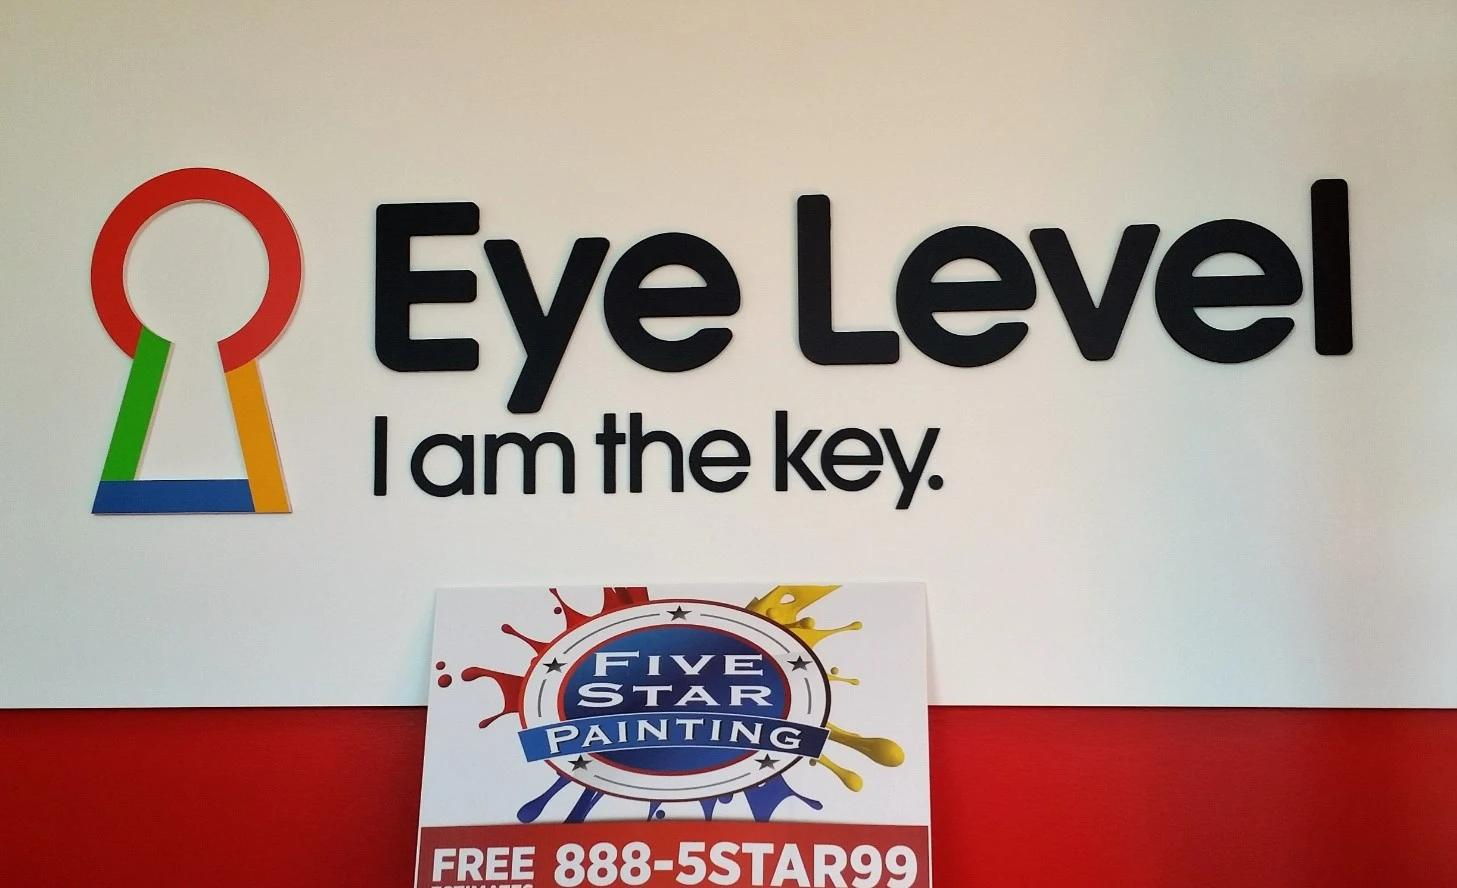 "Photo of Eye Level logo on a wall above a Five Star Painting sign"